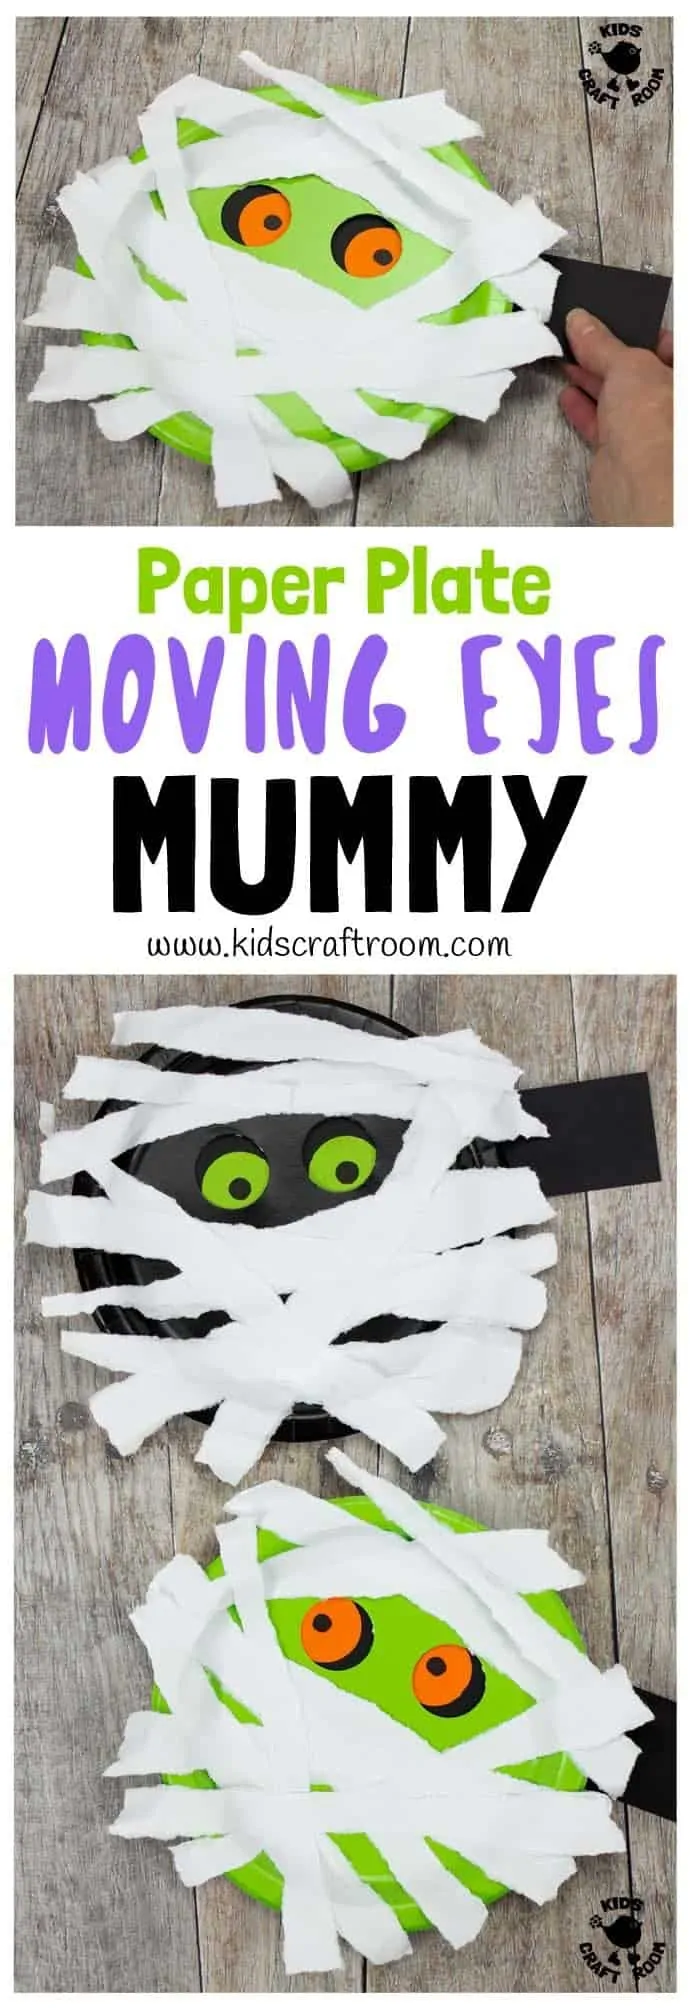 A collage showing three different moving eye mummy crafts for kids.